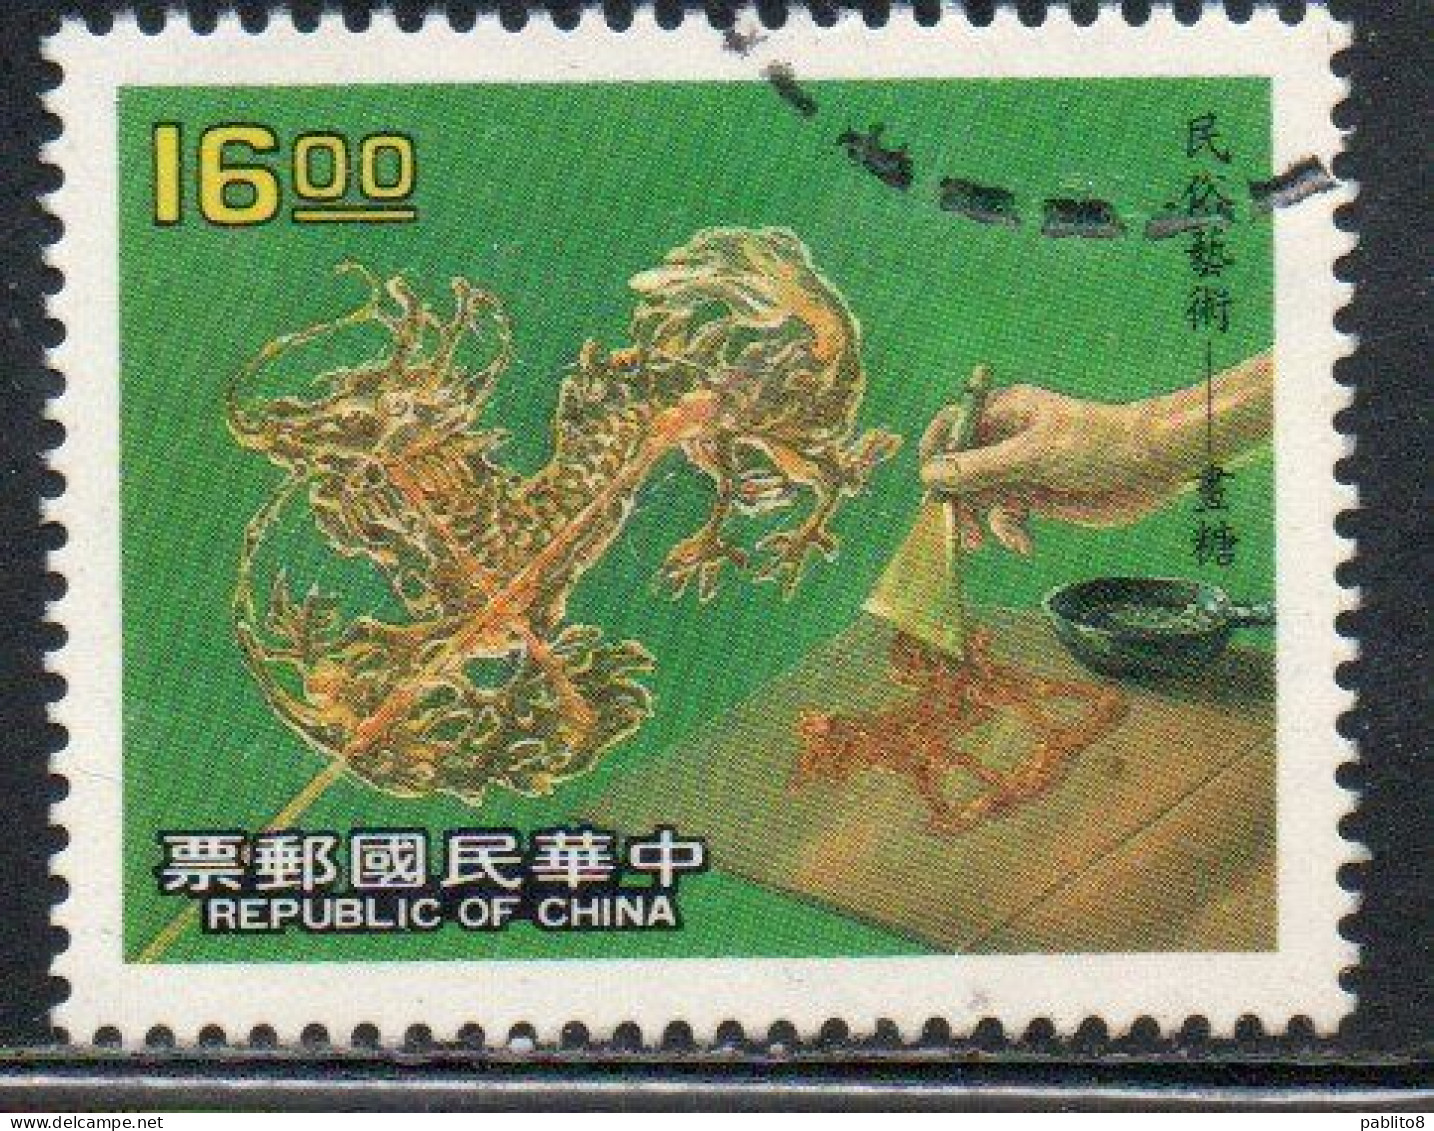 CHINA REPUBLIC CINA TAIWAN FORMOSA 1988 TOURISM DAY SUGAR PAINTINGS 16$ USED USATO OBLITERE' - Used Stamps